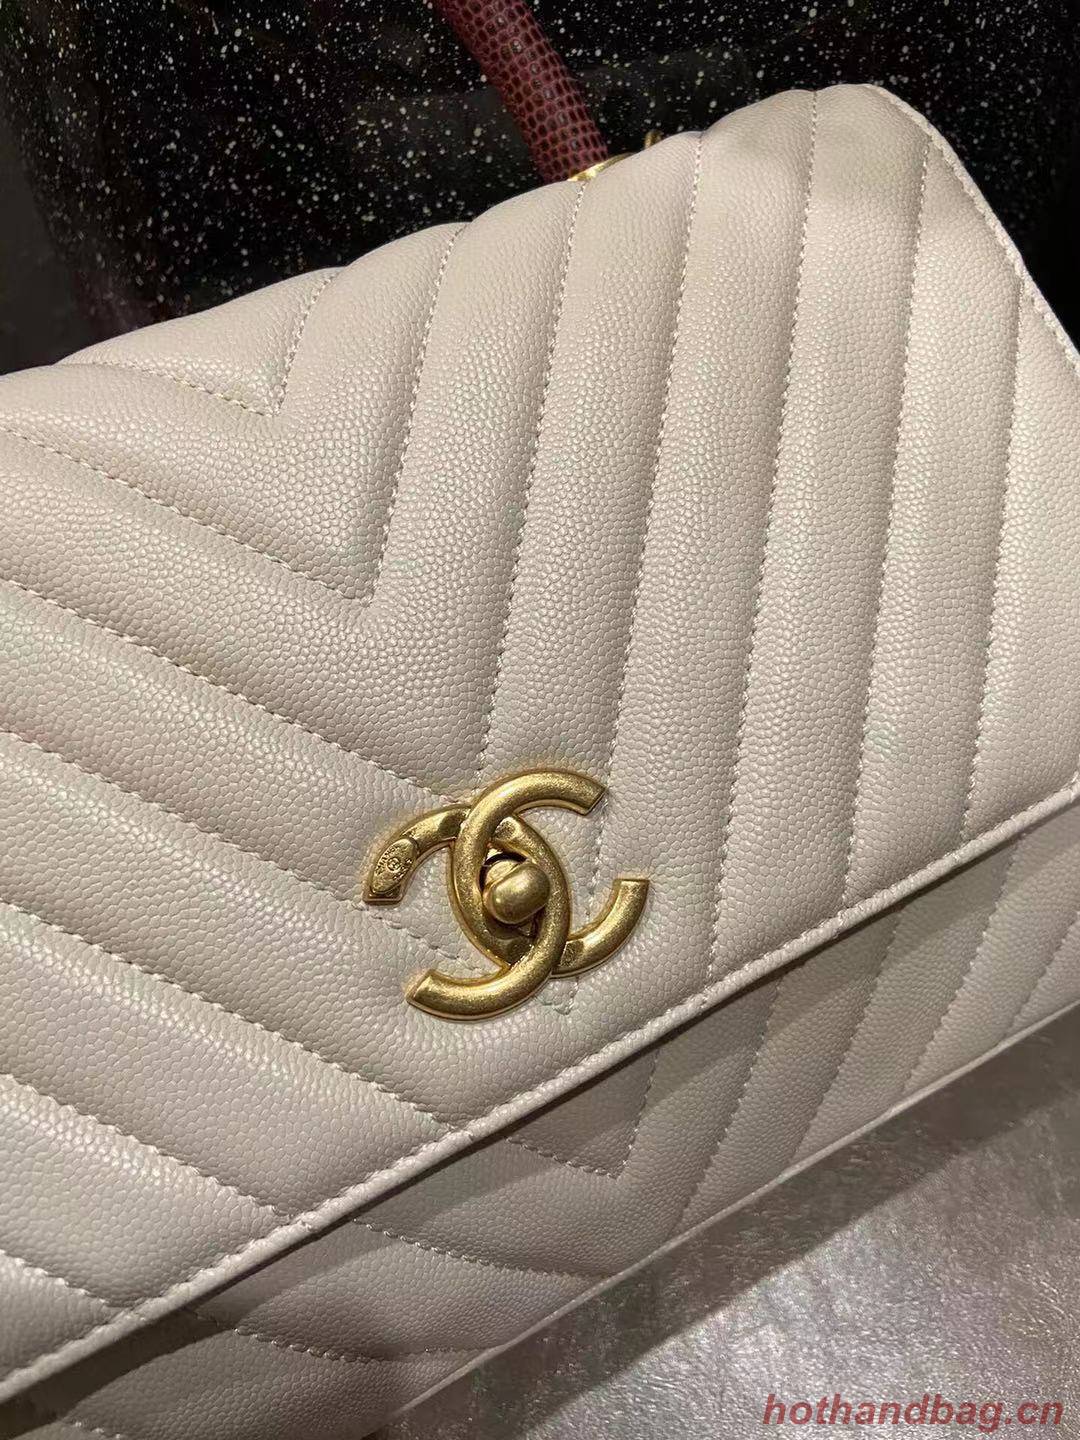 Chanel flap bag with red top handle V92991 white